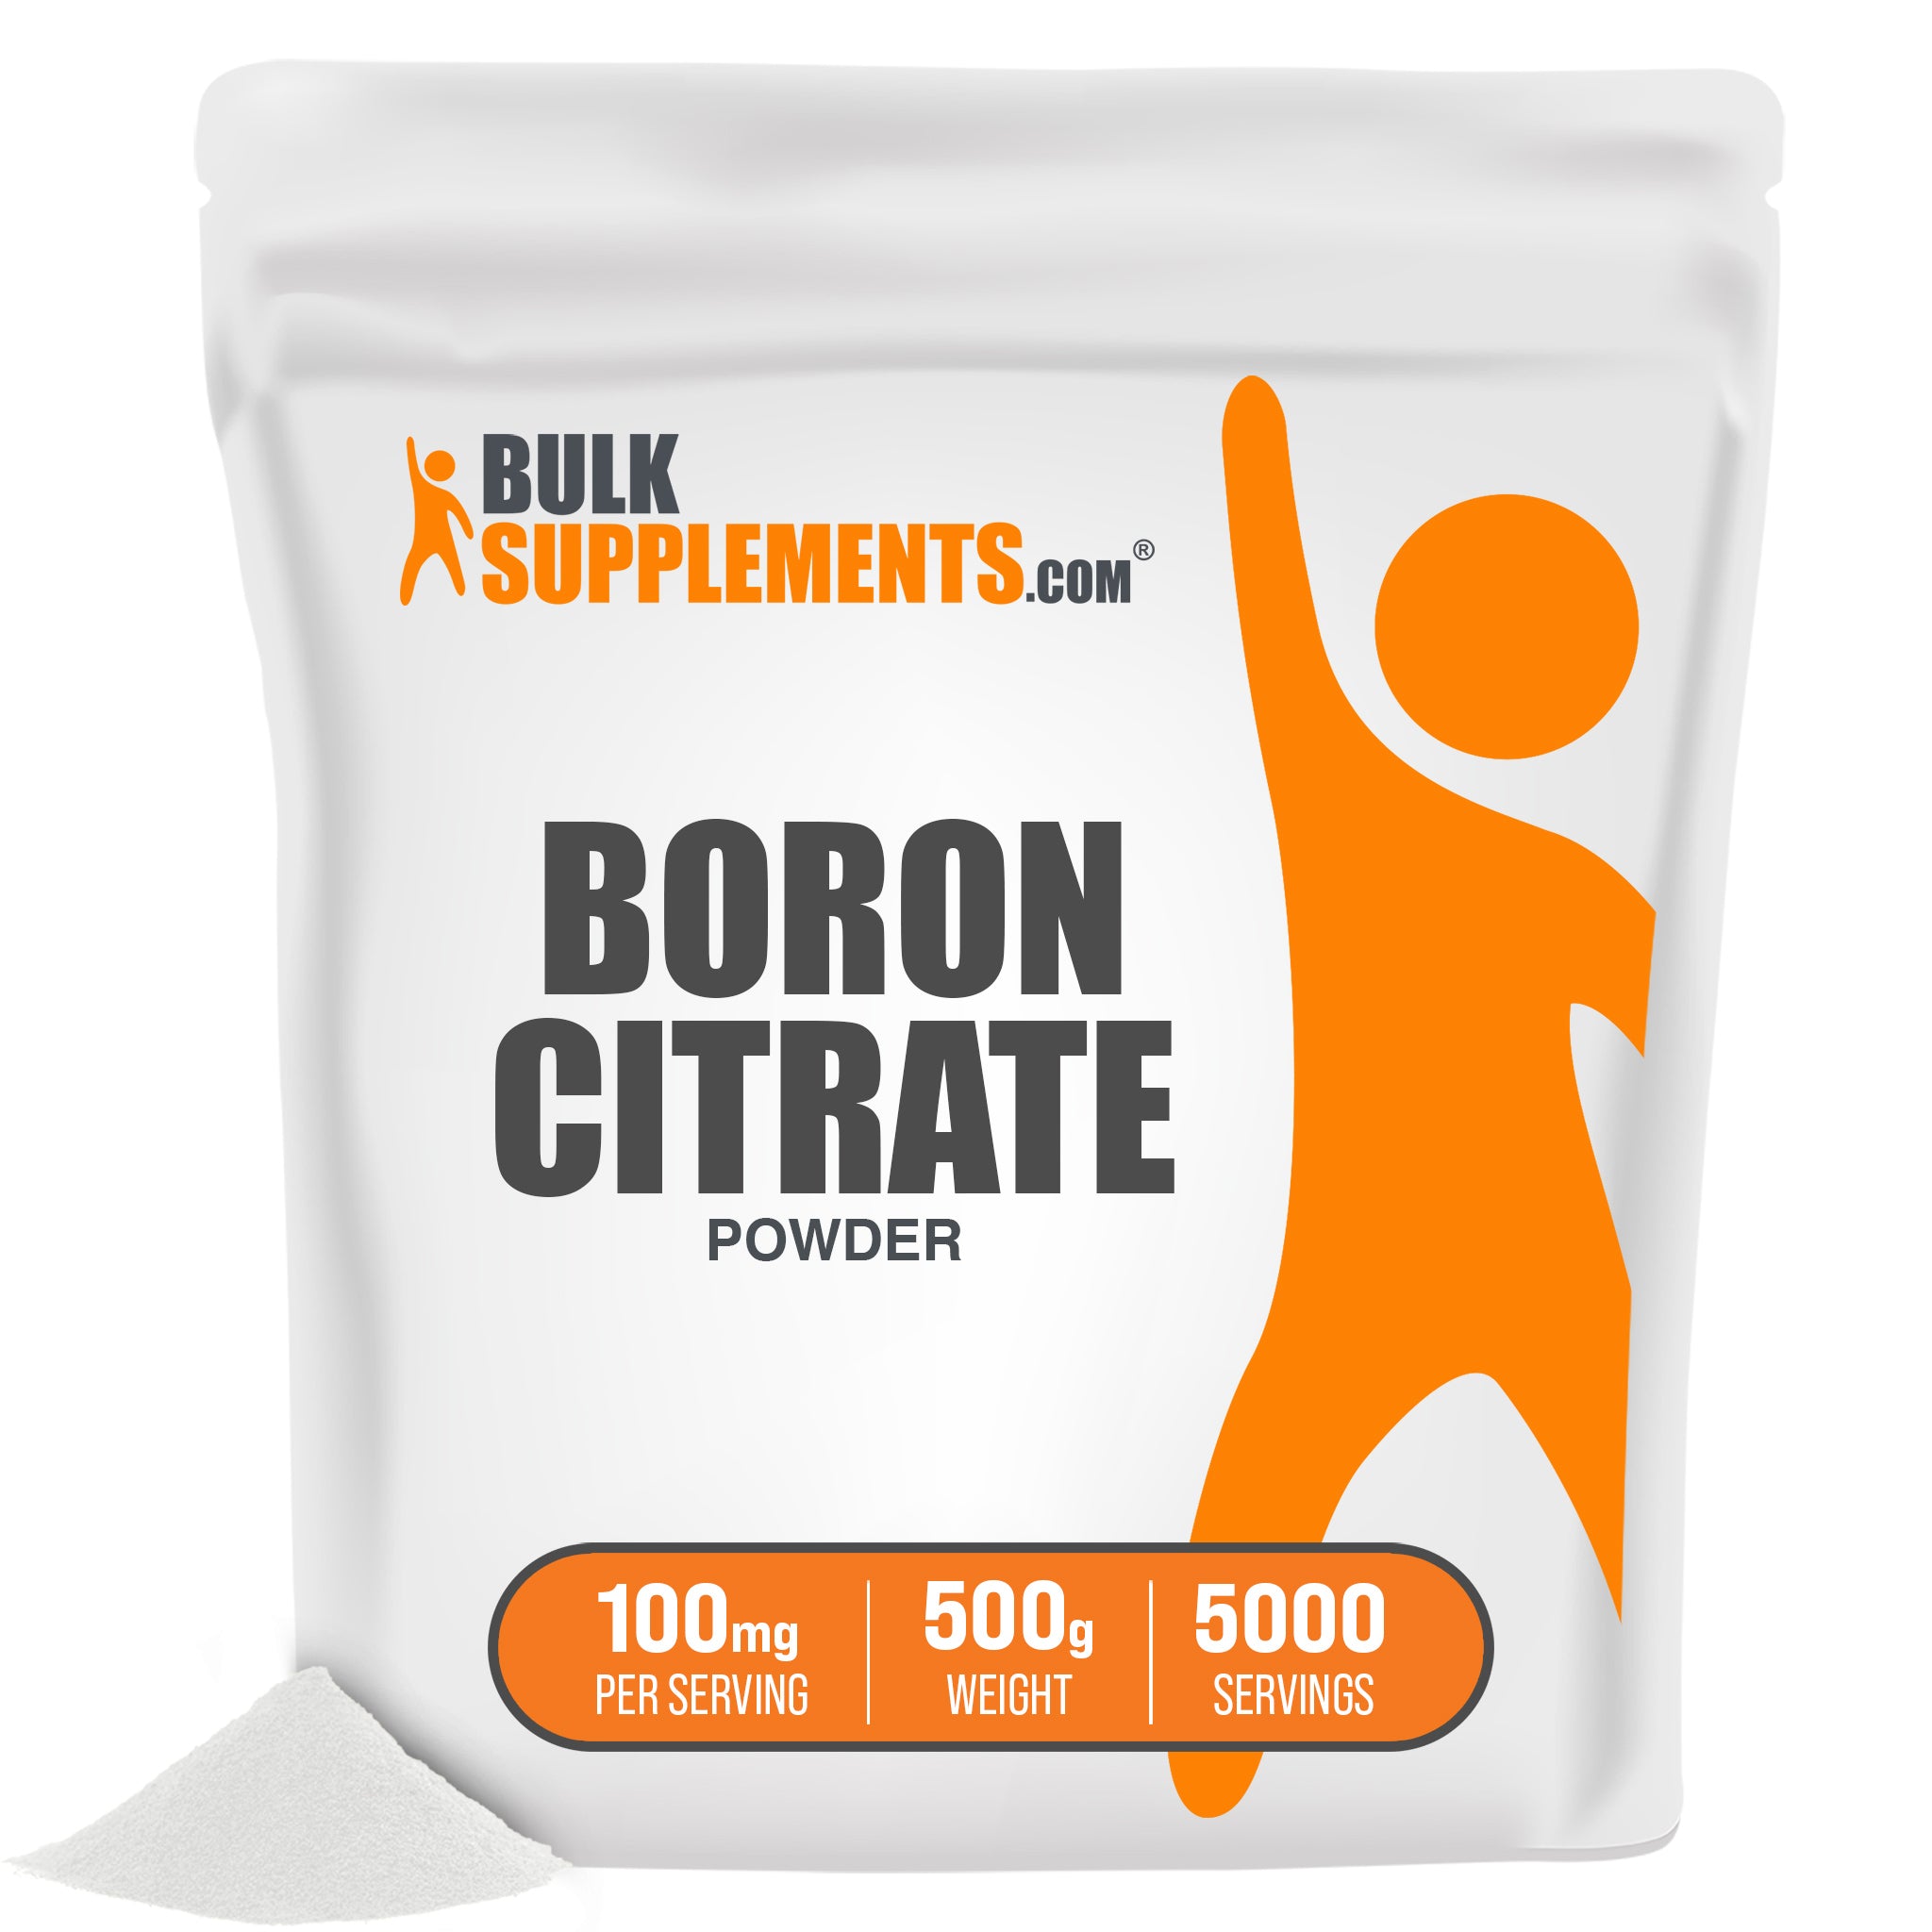 500g of boron citrate